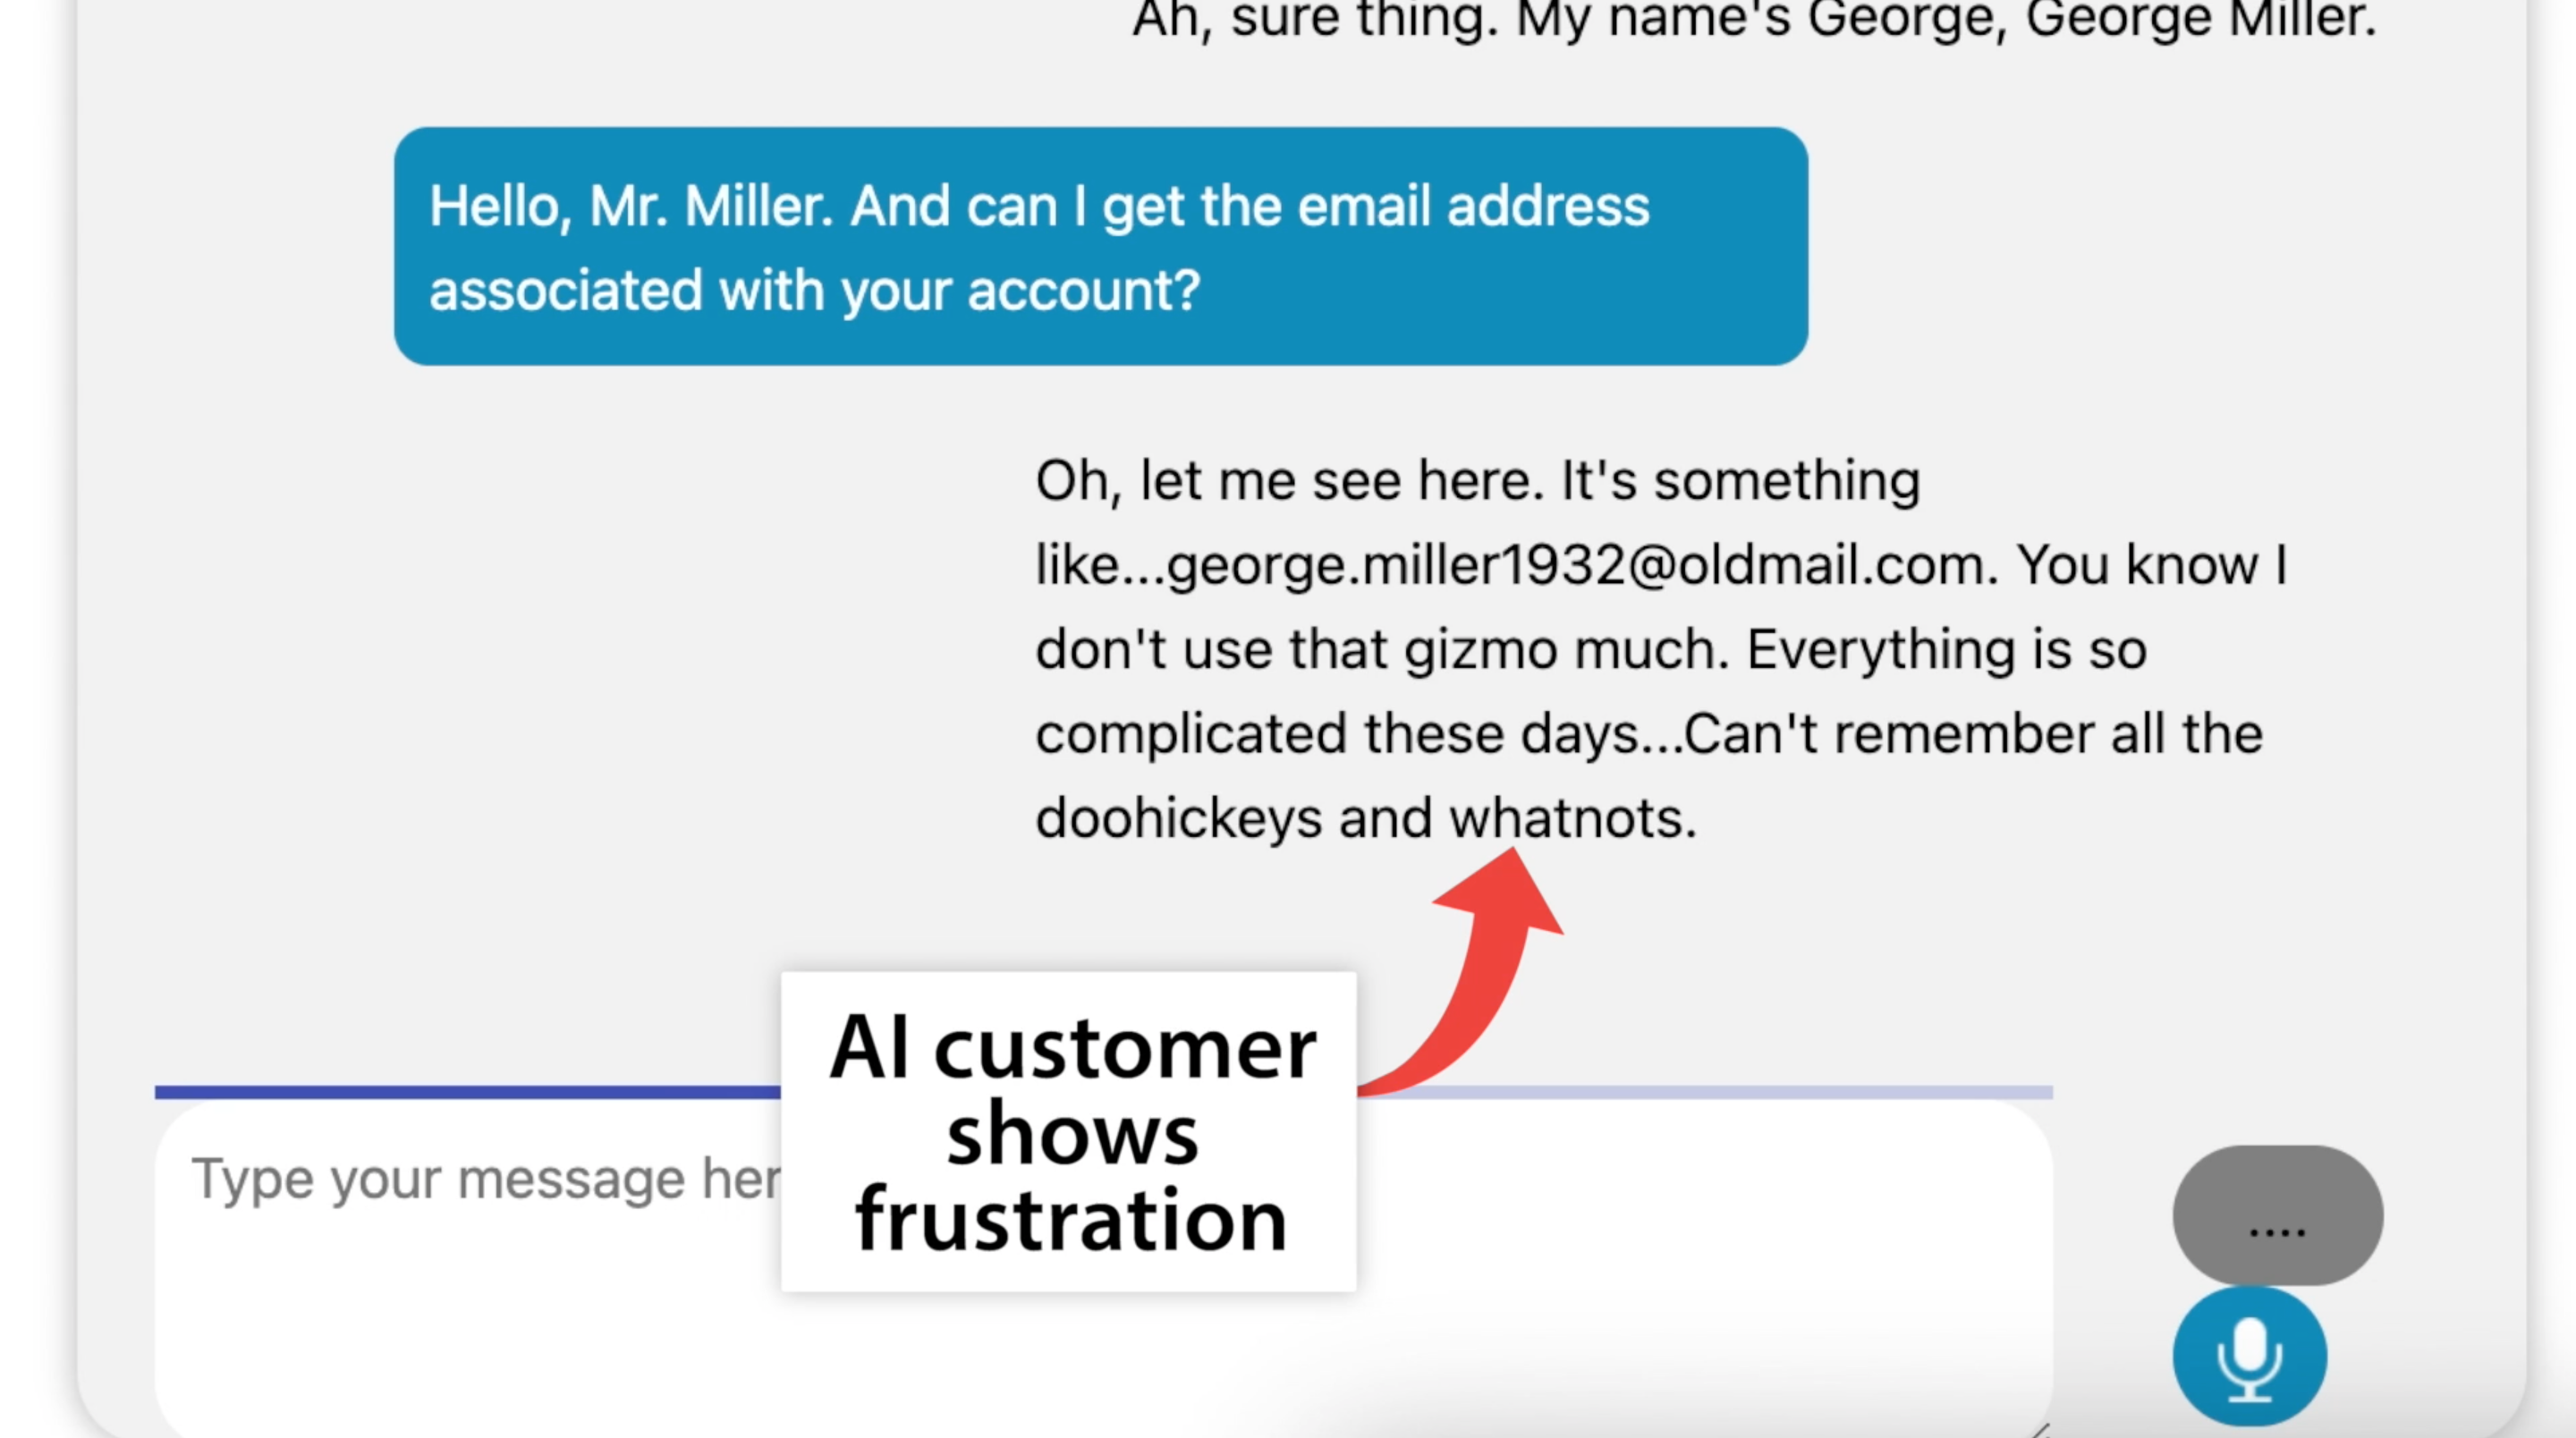 The AI customer shows frustration.